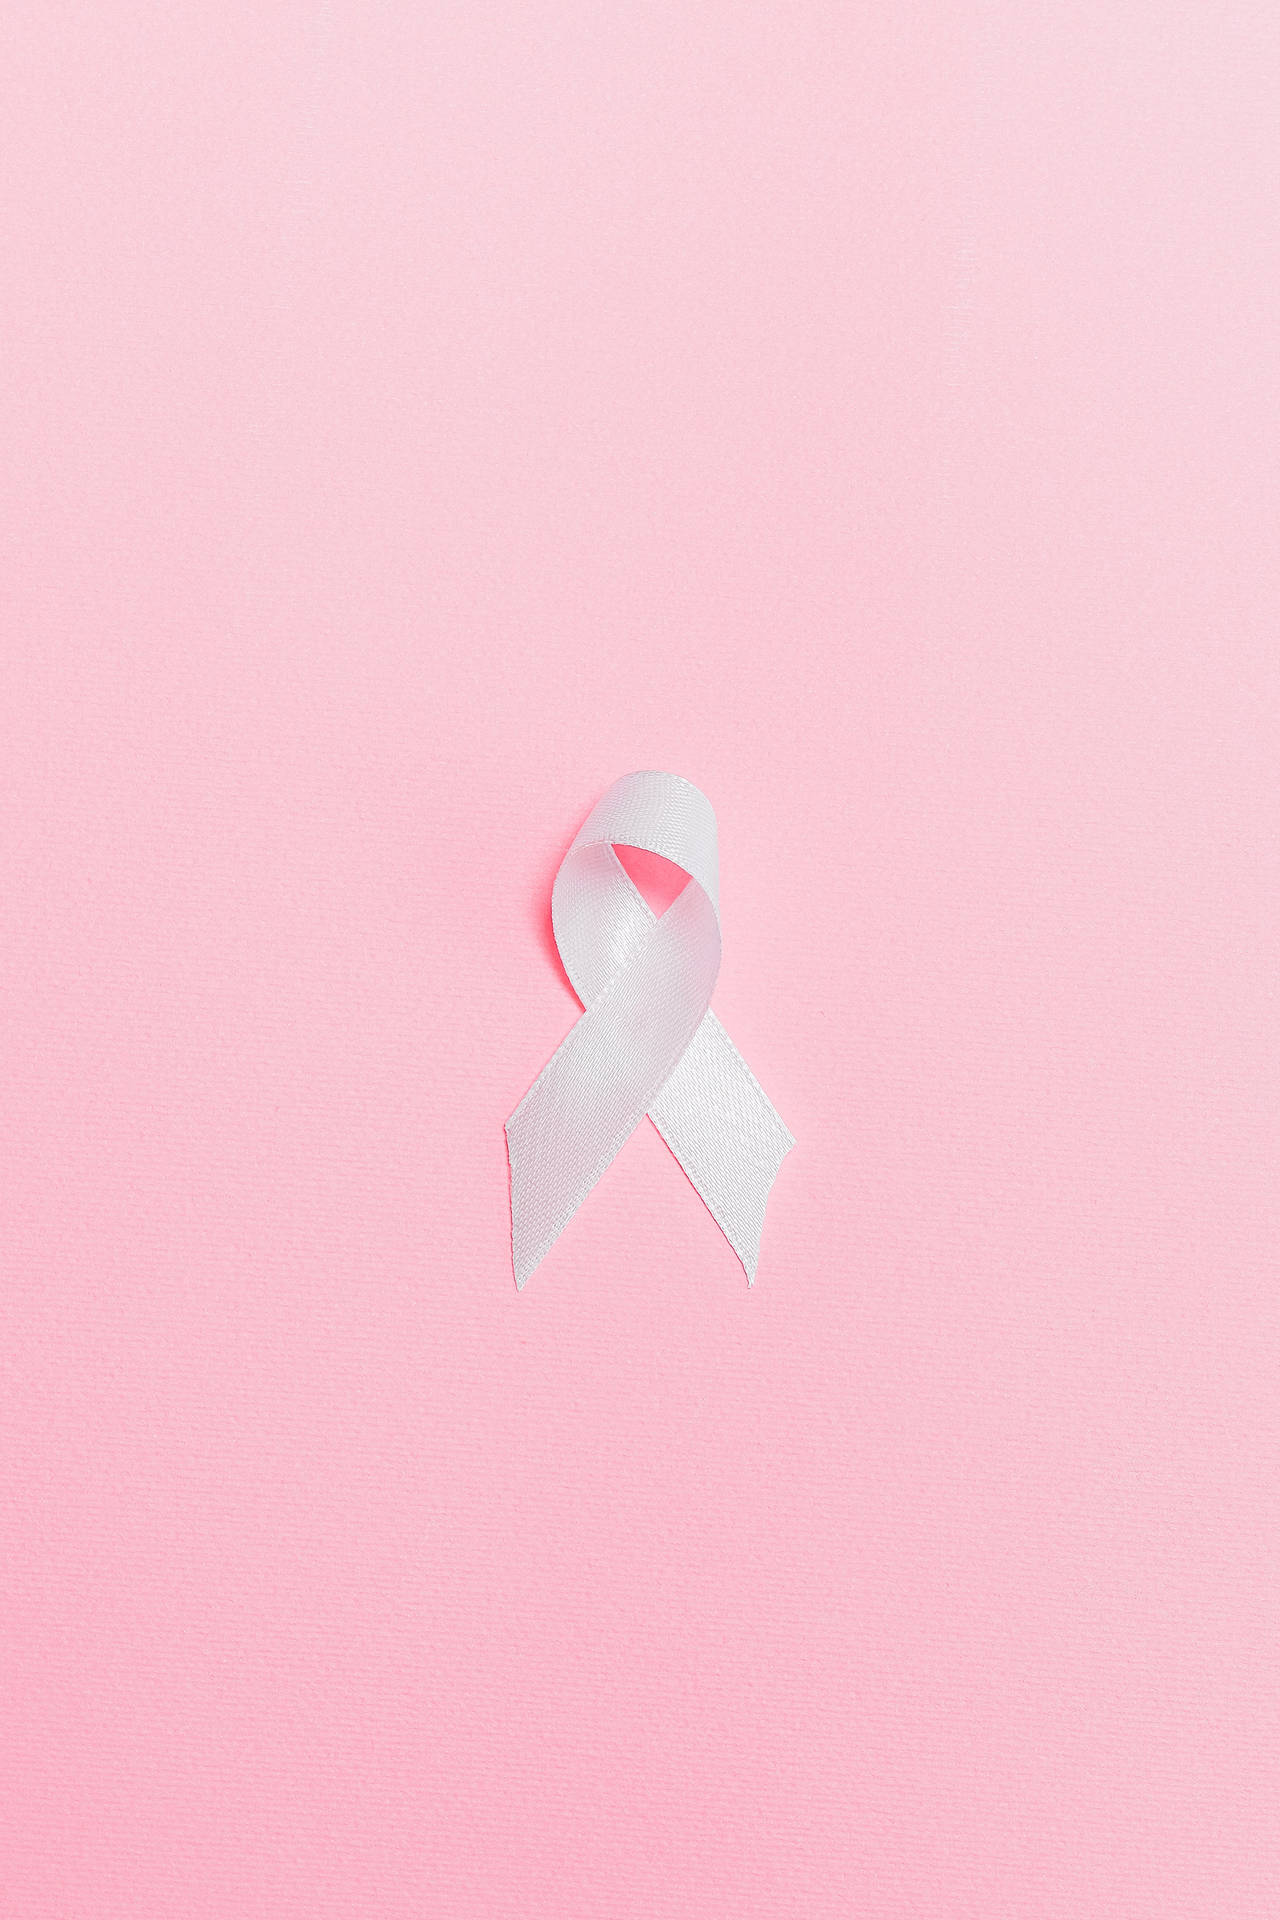 3638X5457 Pink Background Wallpaper and Background